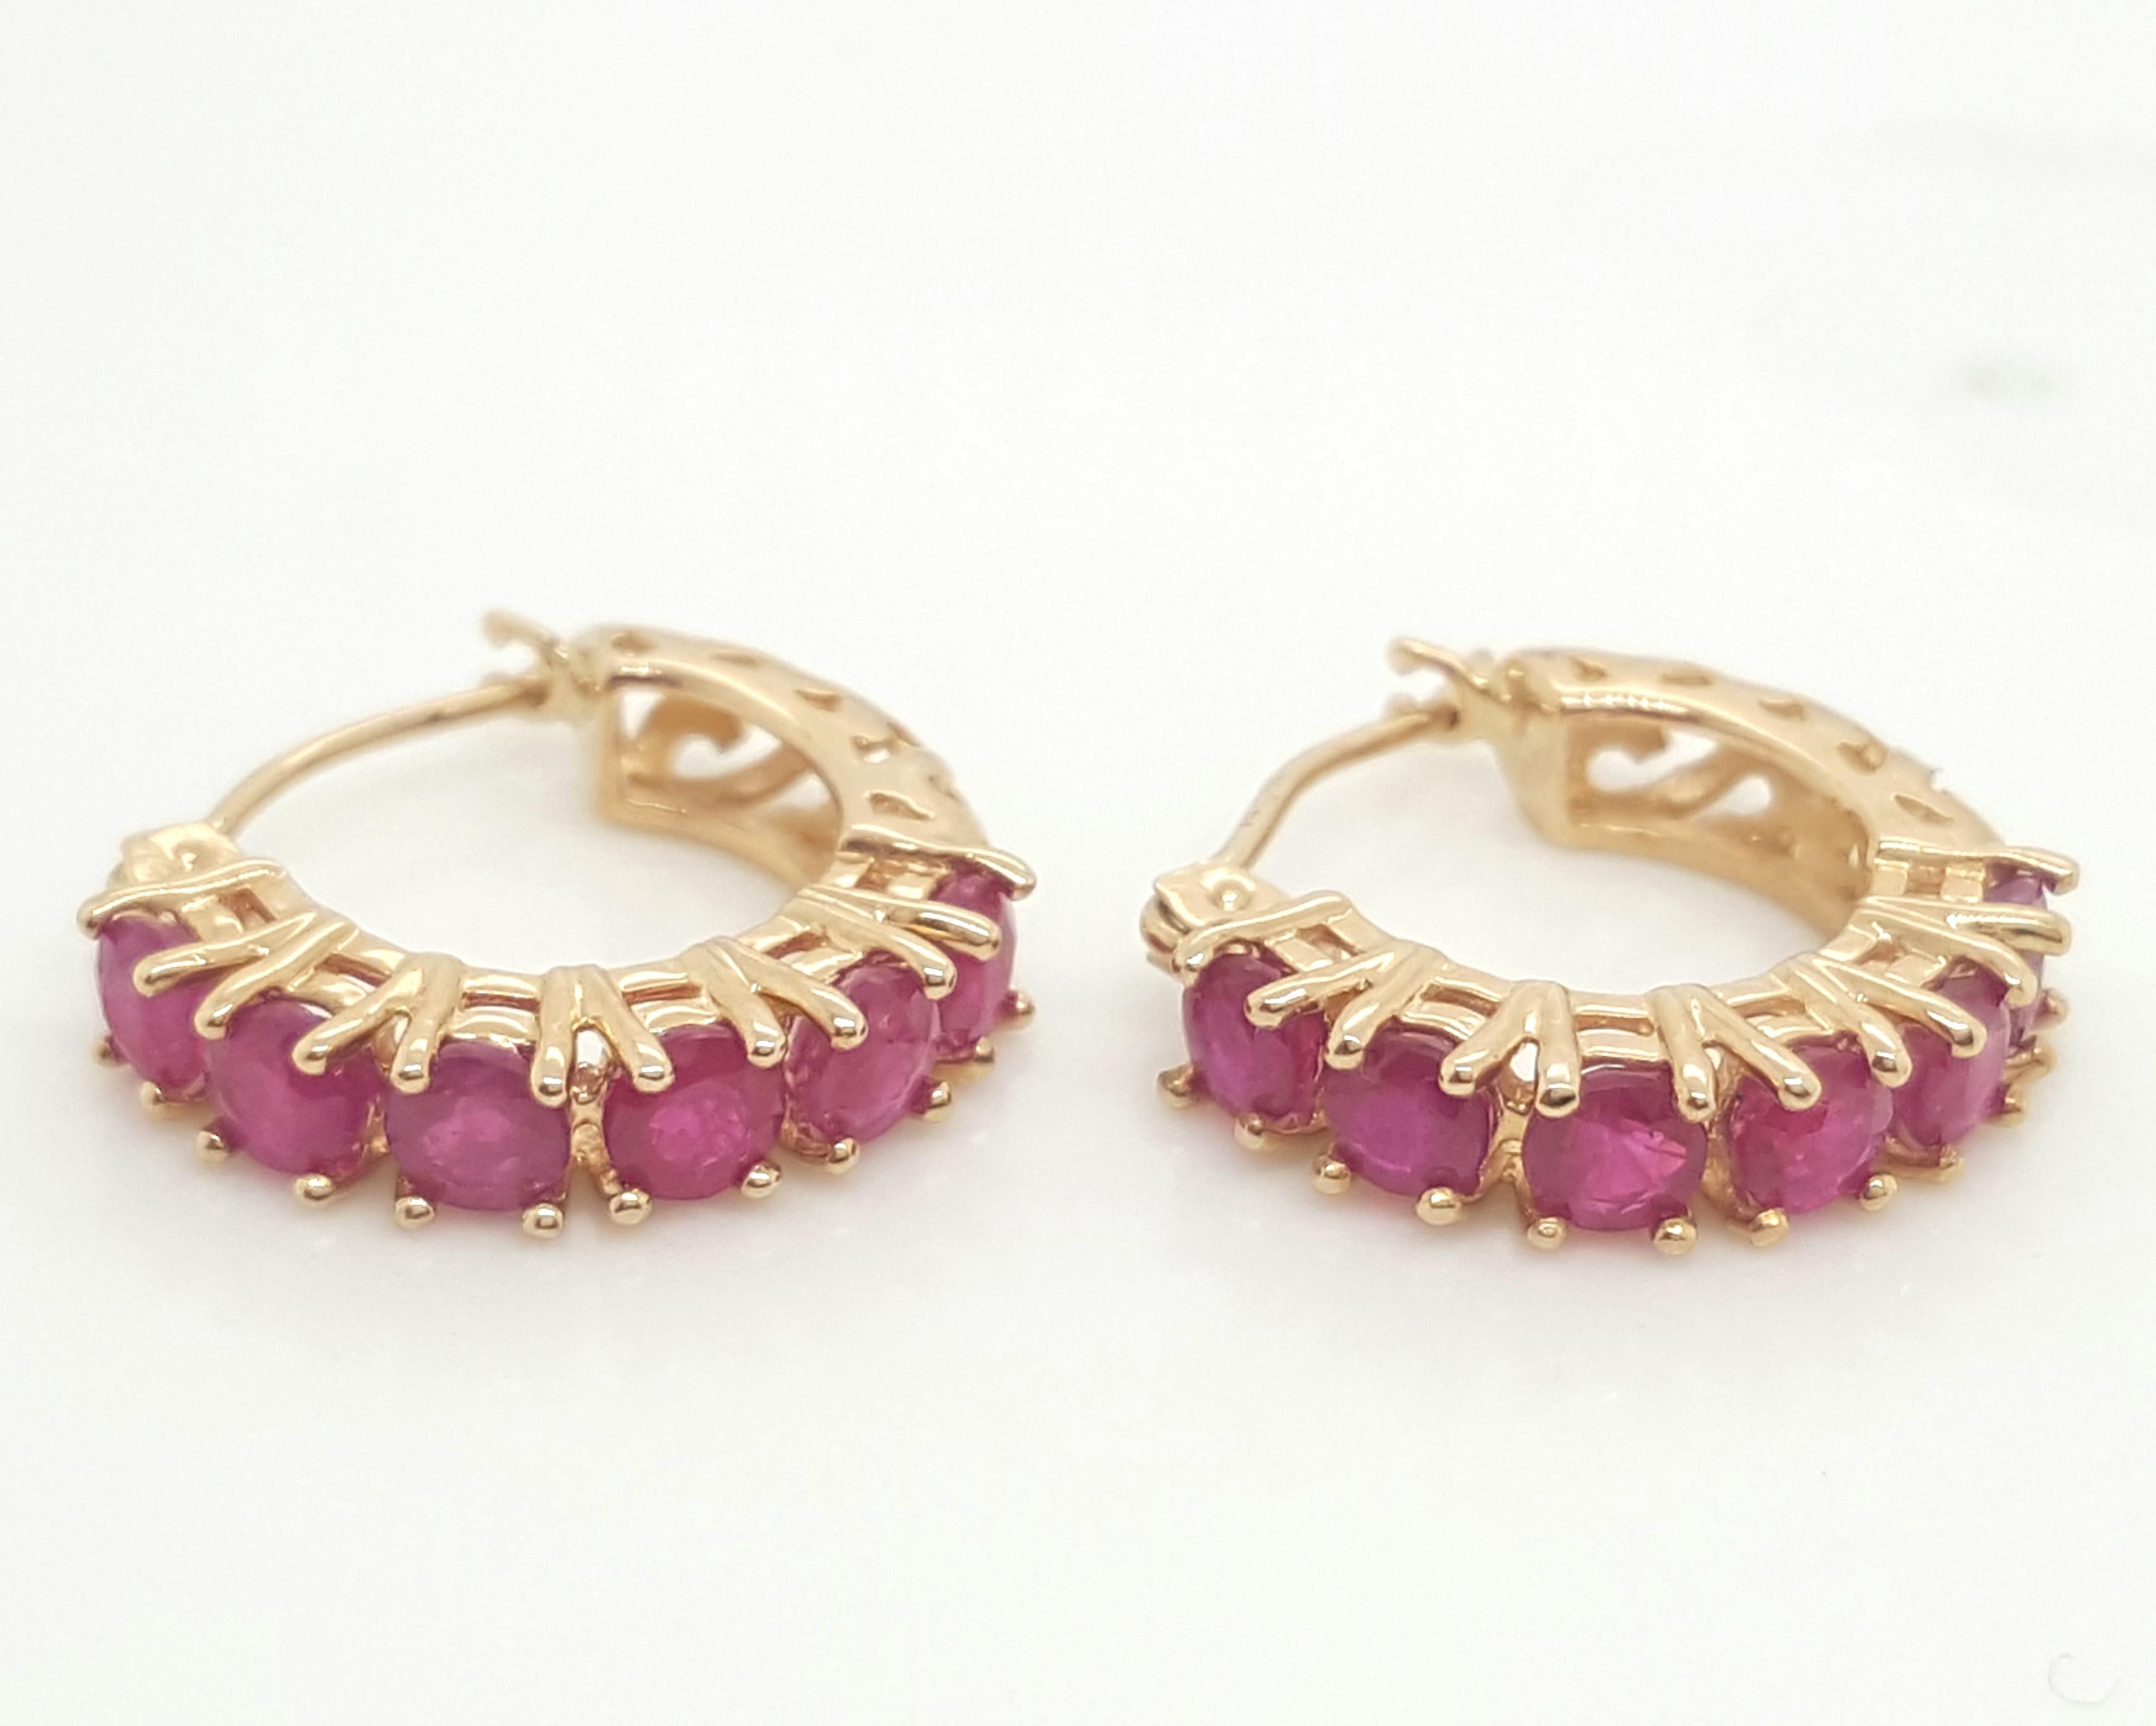 14K Yellow Gold Vintage Style Ruby Hoop Huggie Earrings. Theses vintage inspired earrings feature by 12 round rubies weighing a total of approximately 1.20 carats. They are adorable and classic and perfect for any occasion!
  
Earrings